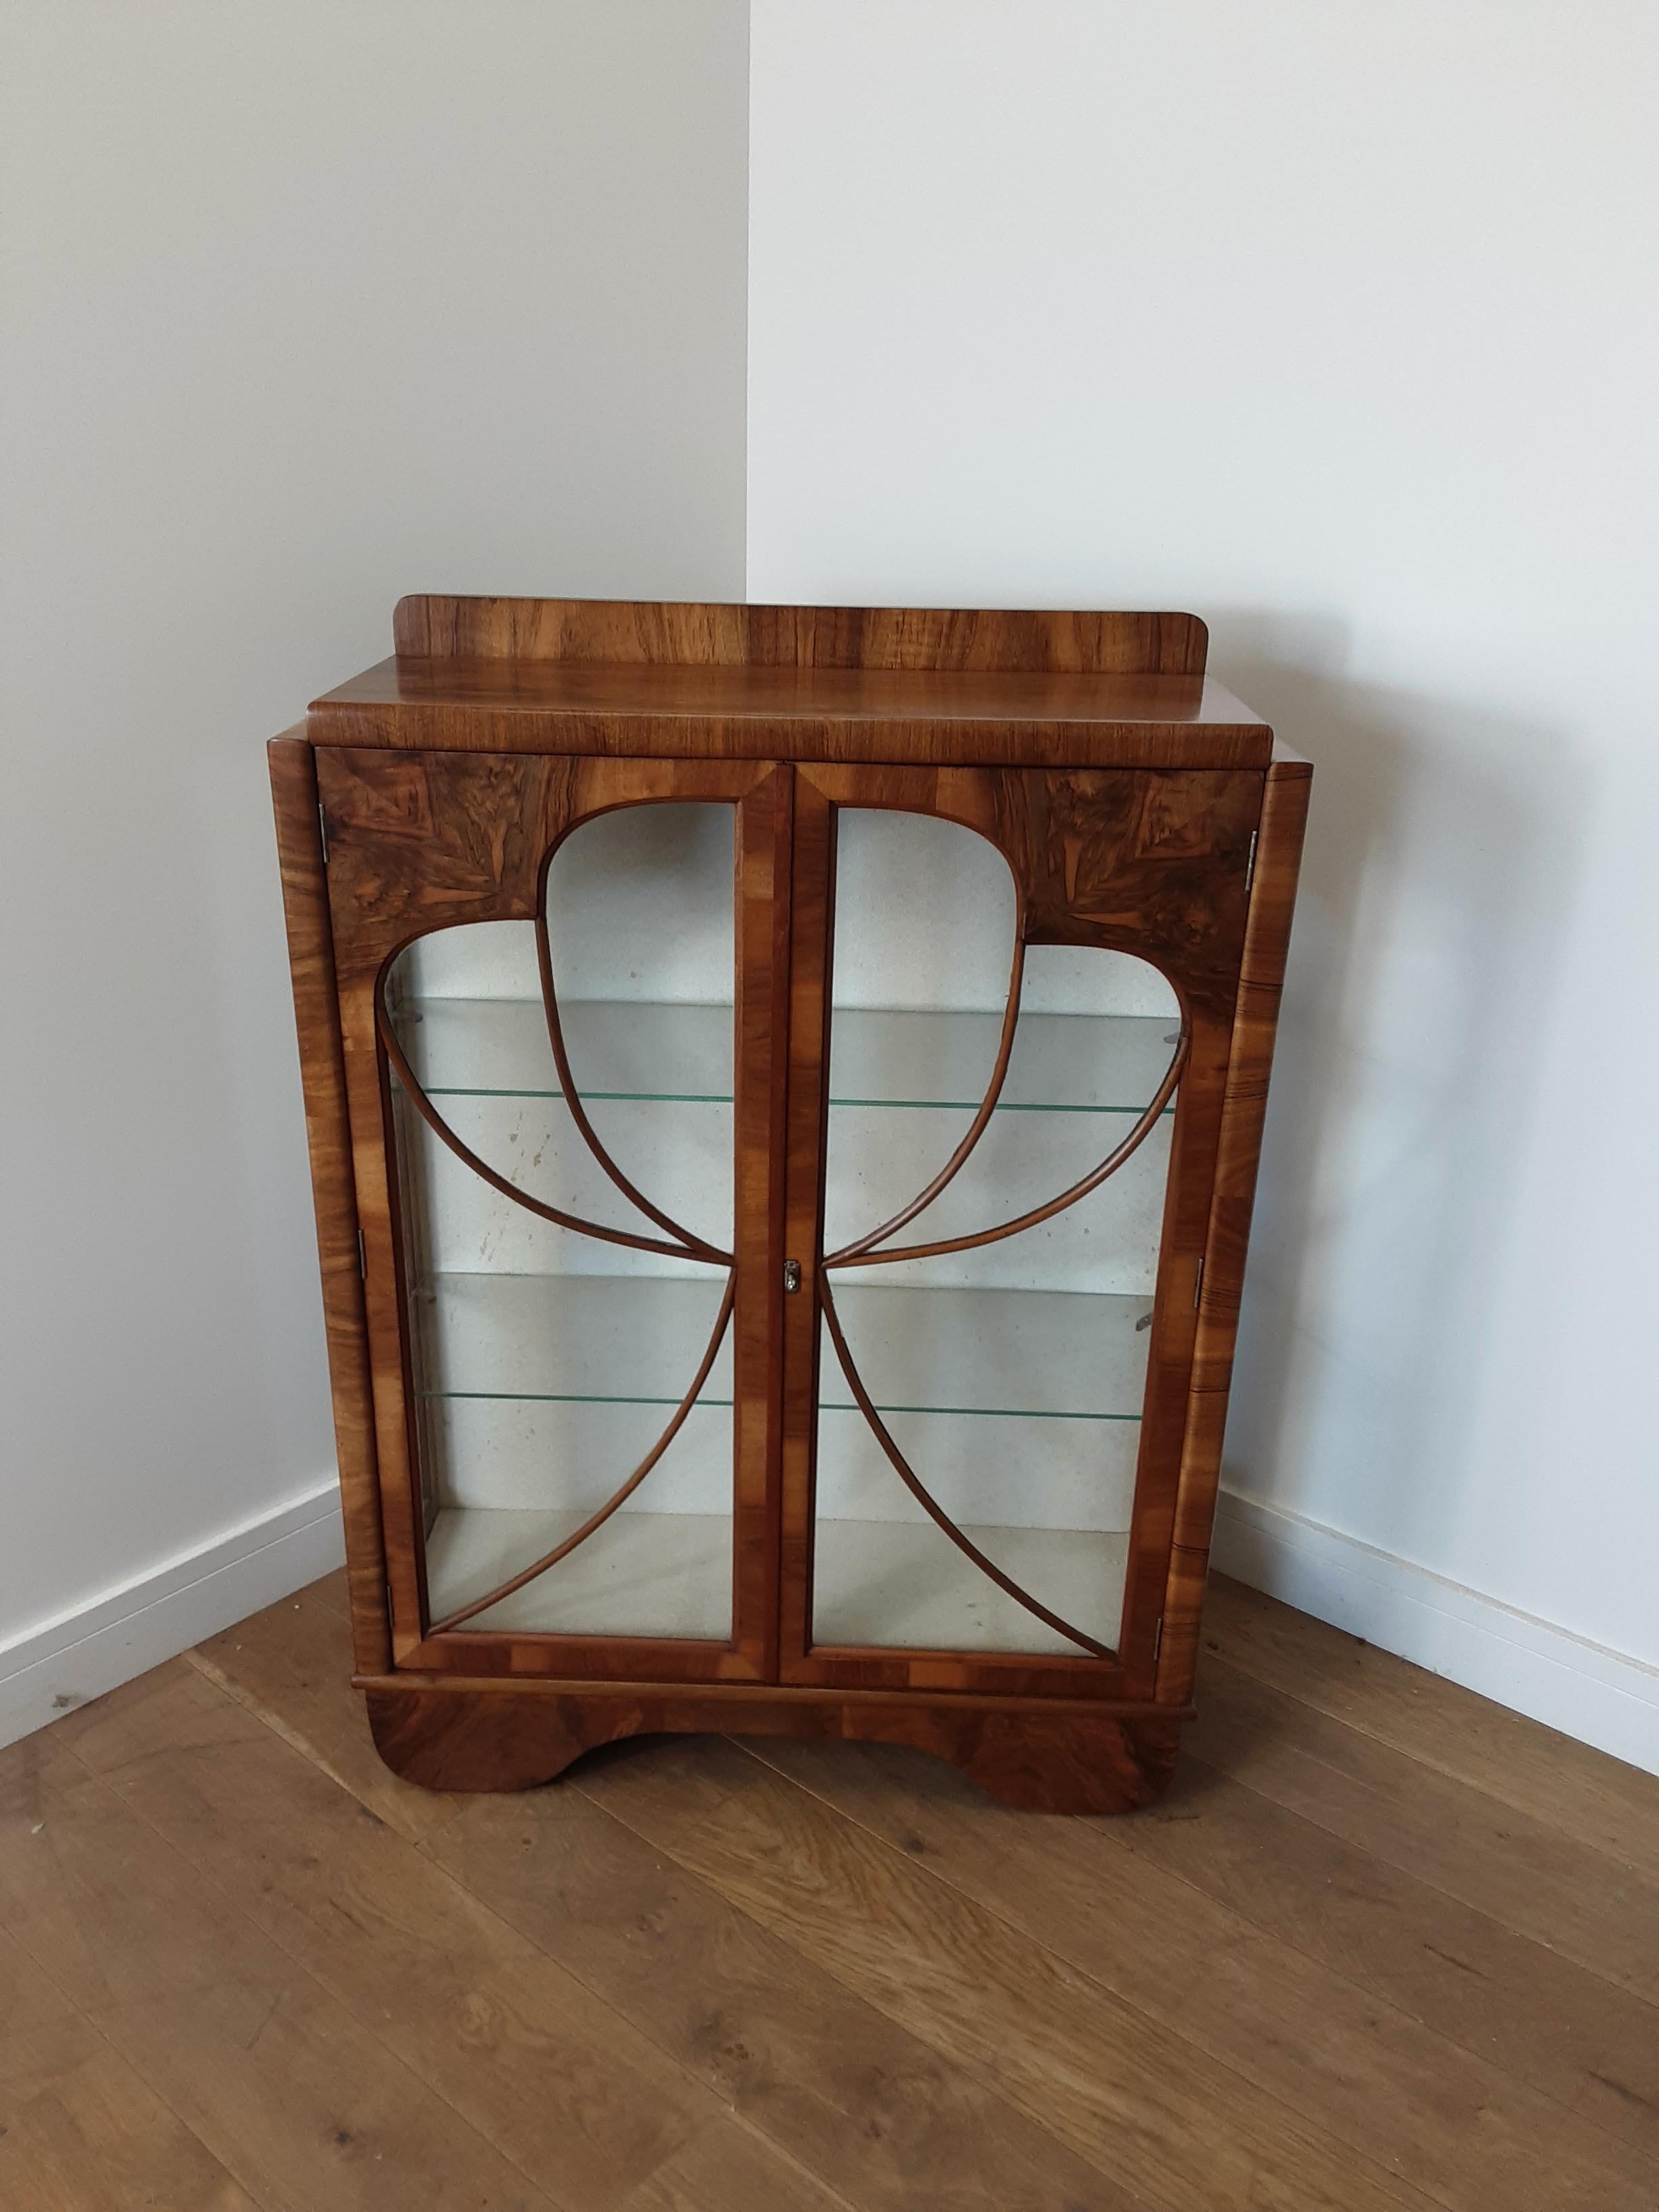 Art Deco vitrine in walnut with glazed front doors having a fretwork design of a butterfly. Also with glazed side panels giving plenty of light.
A very pretty display cabinet bookcase.
Measures: 122 cm H at the front 116 cm H at the back. 88 cm W,